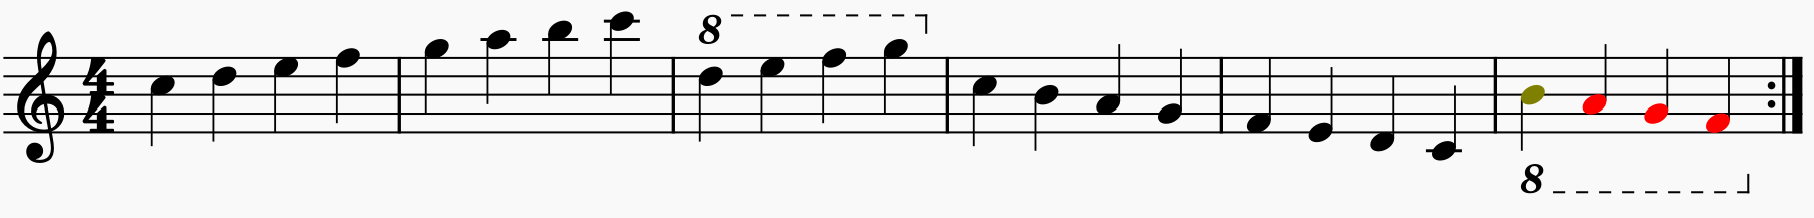 stave, ledger lines and the ottava sign